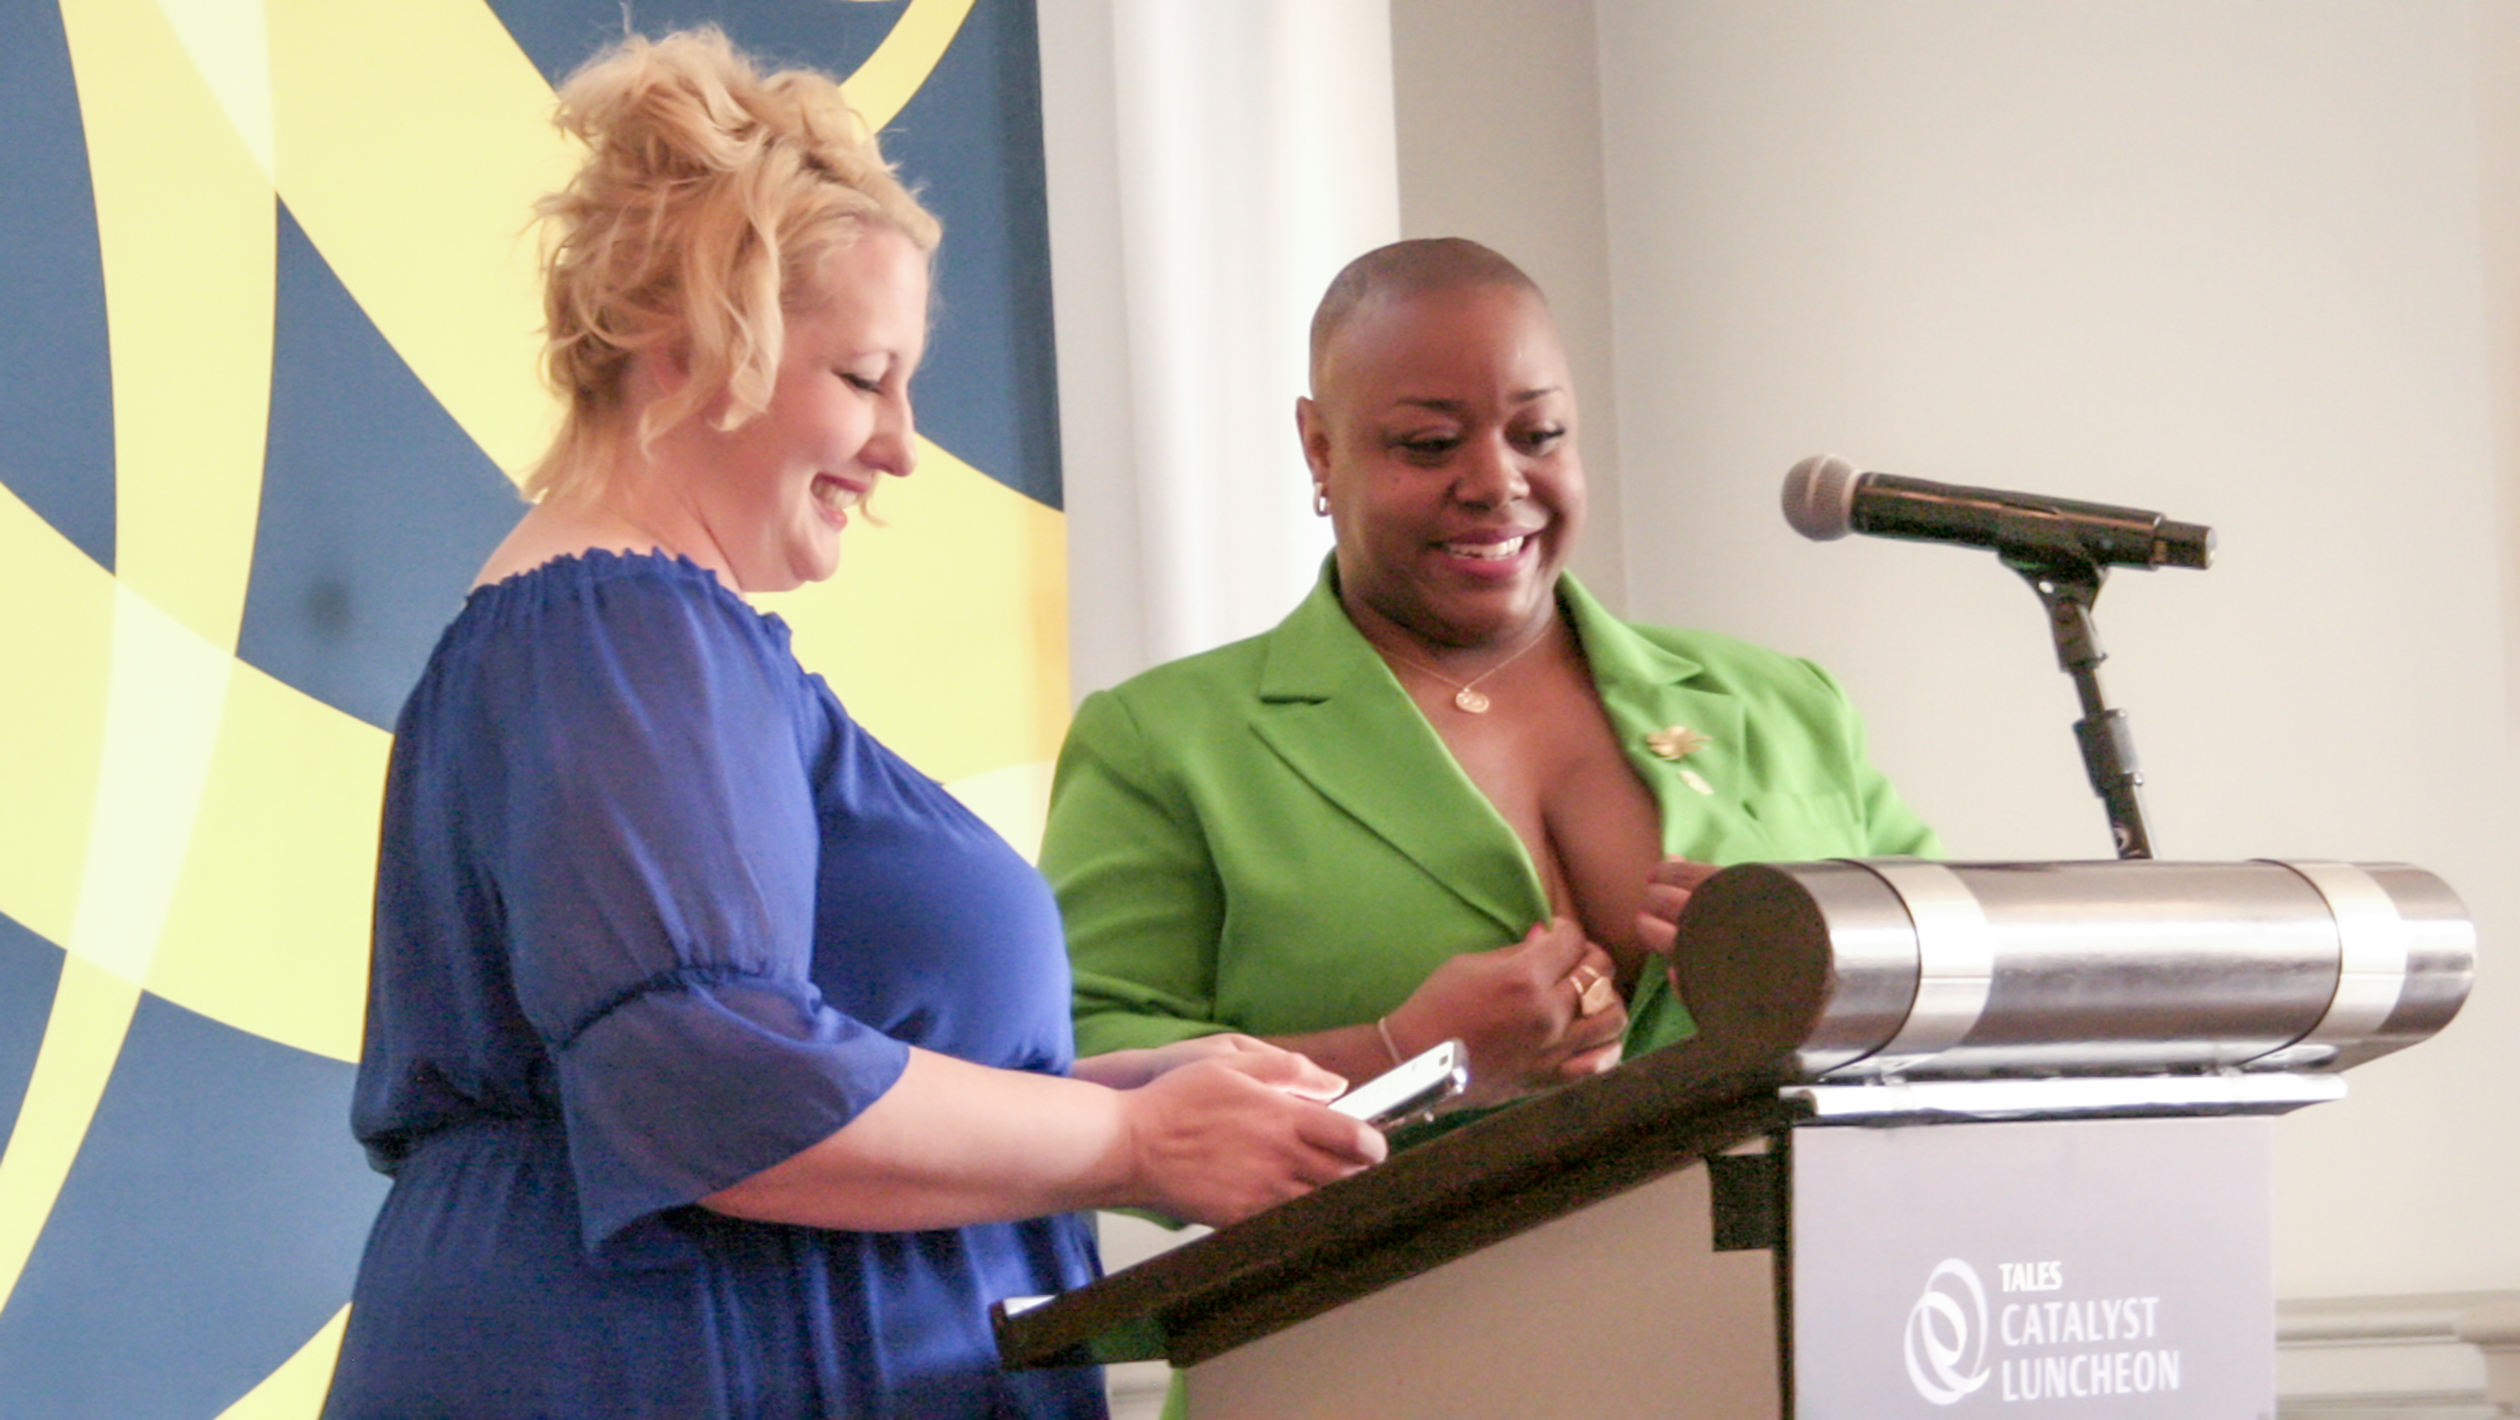 Kitty Amann and Tiffanie Barriere at the Catalyst Luncheon as they introduce the honorees